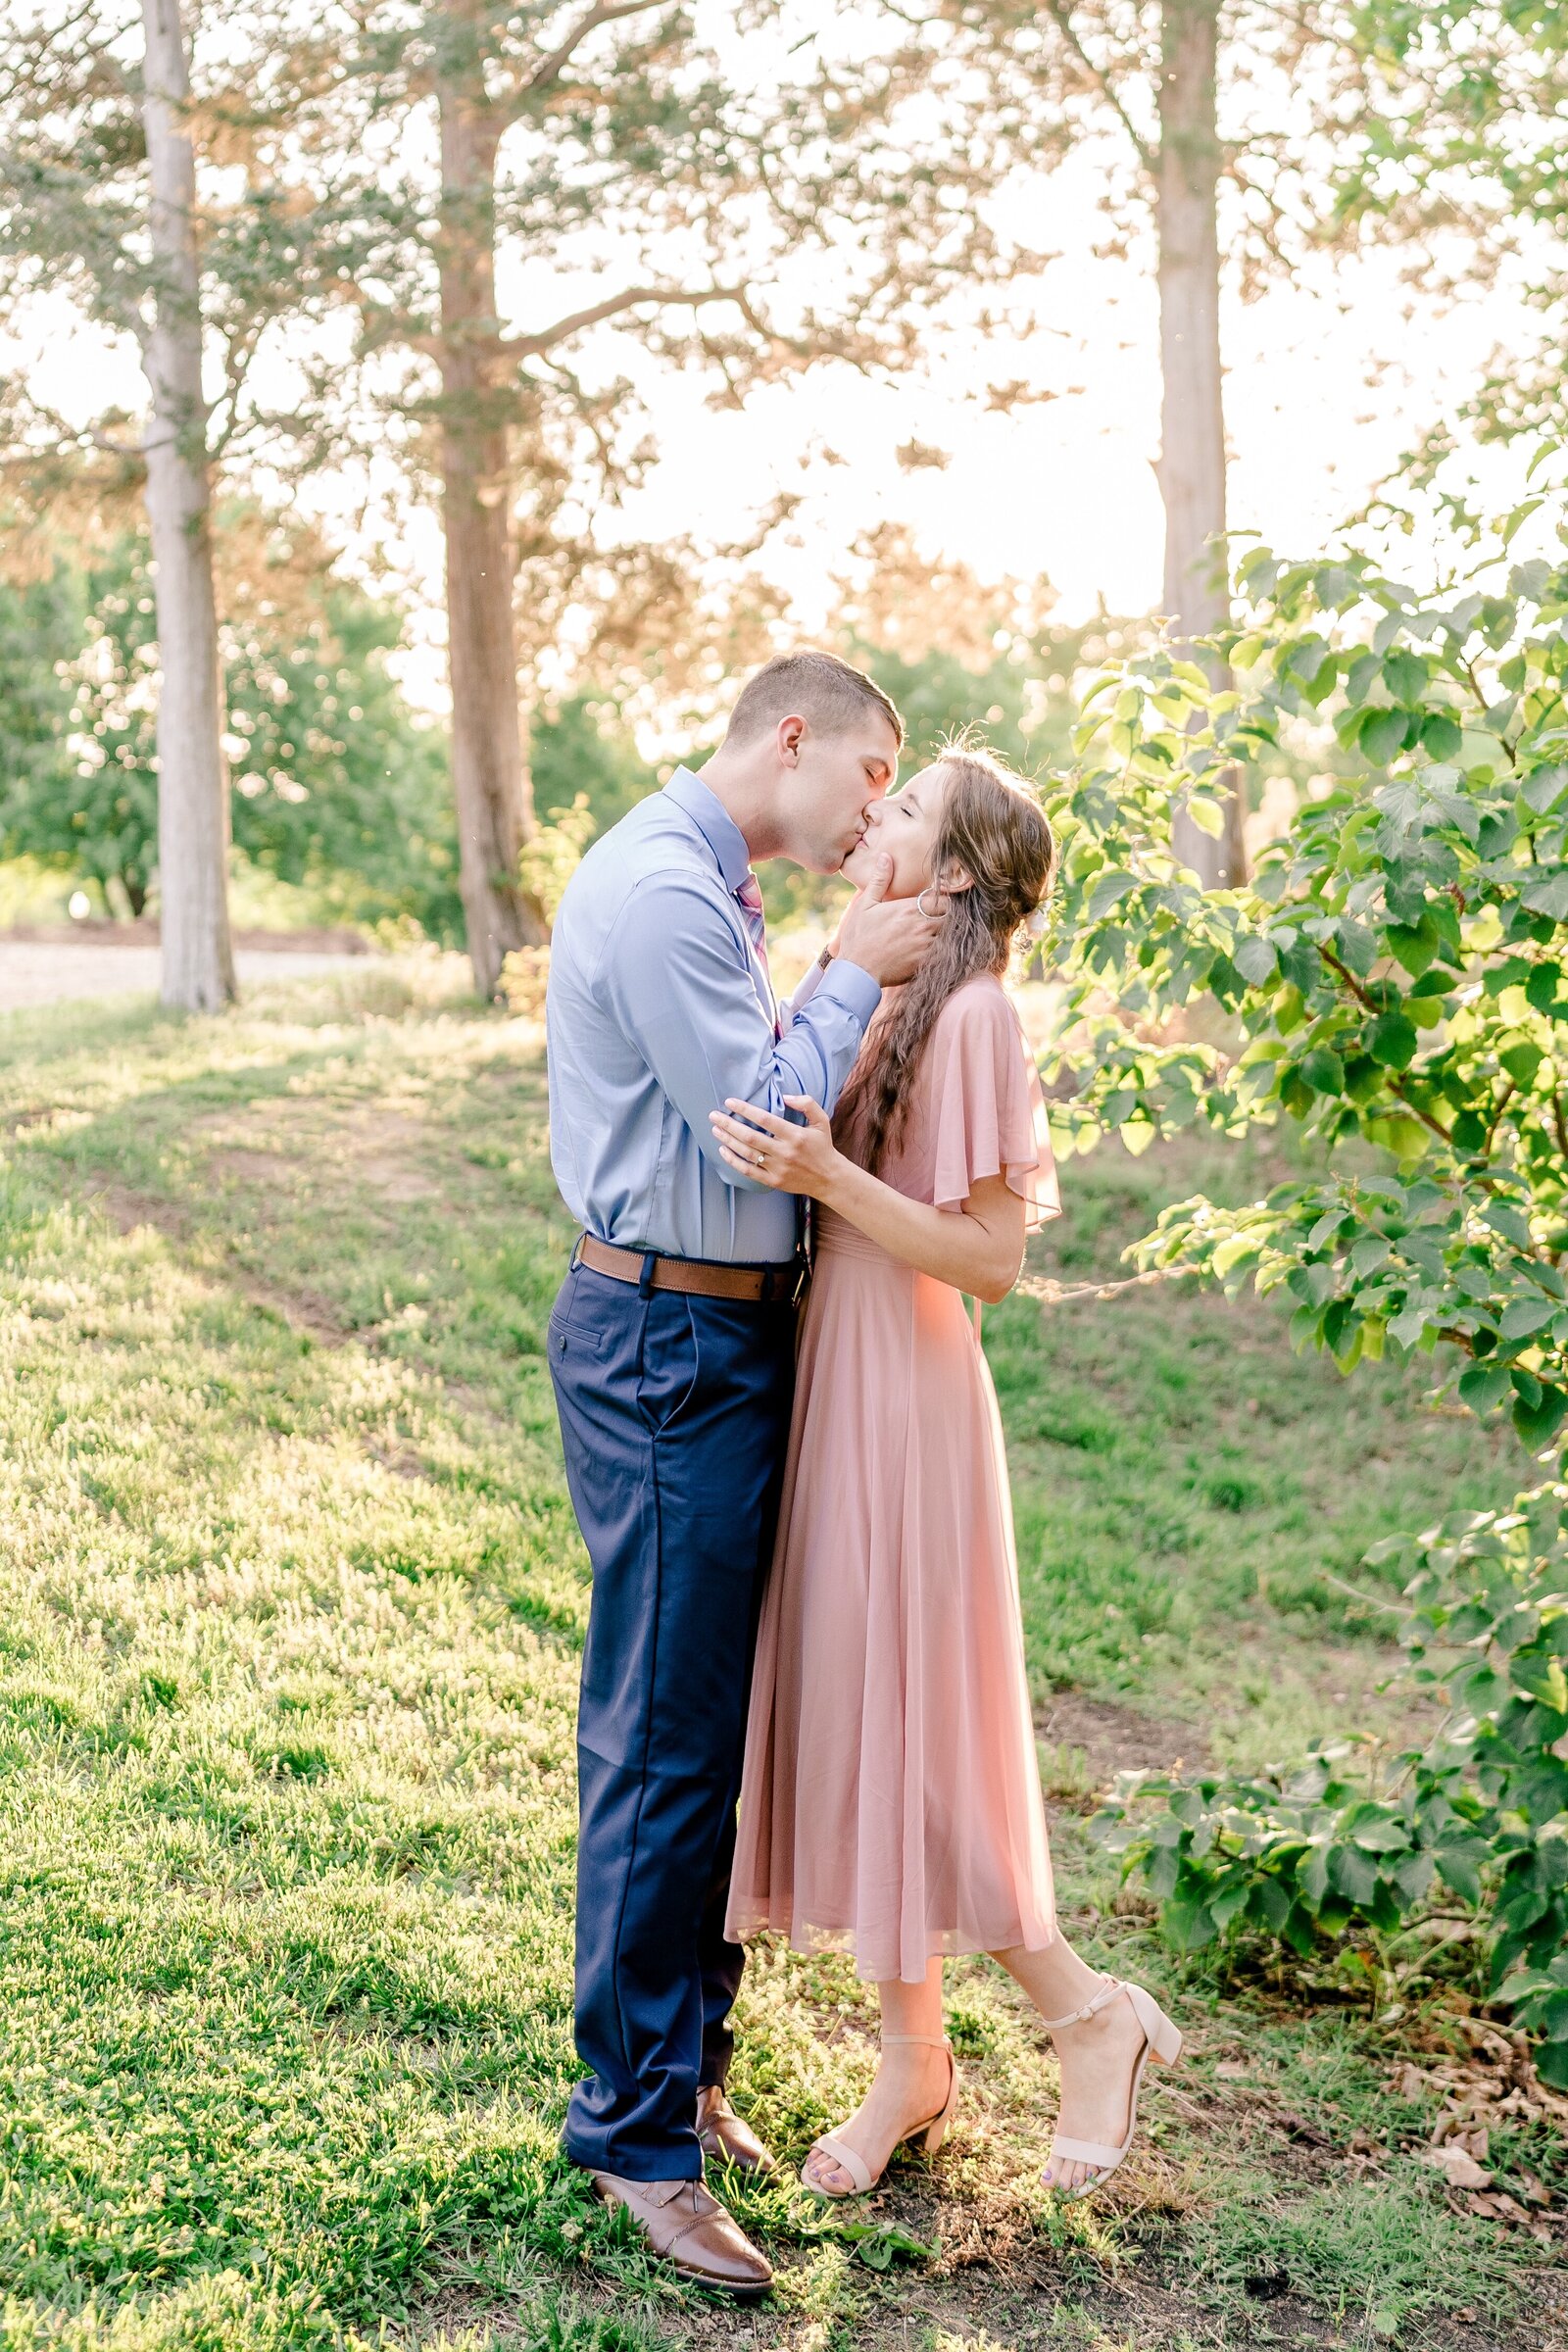 An engaged couple shares a kiss in golden hour light during their engagement session at Green Spring Gardens in Northern Virginia